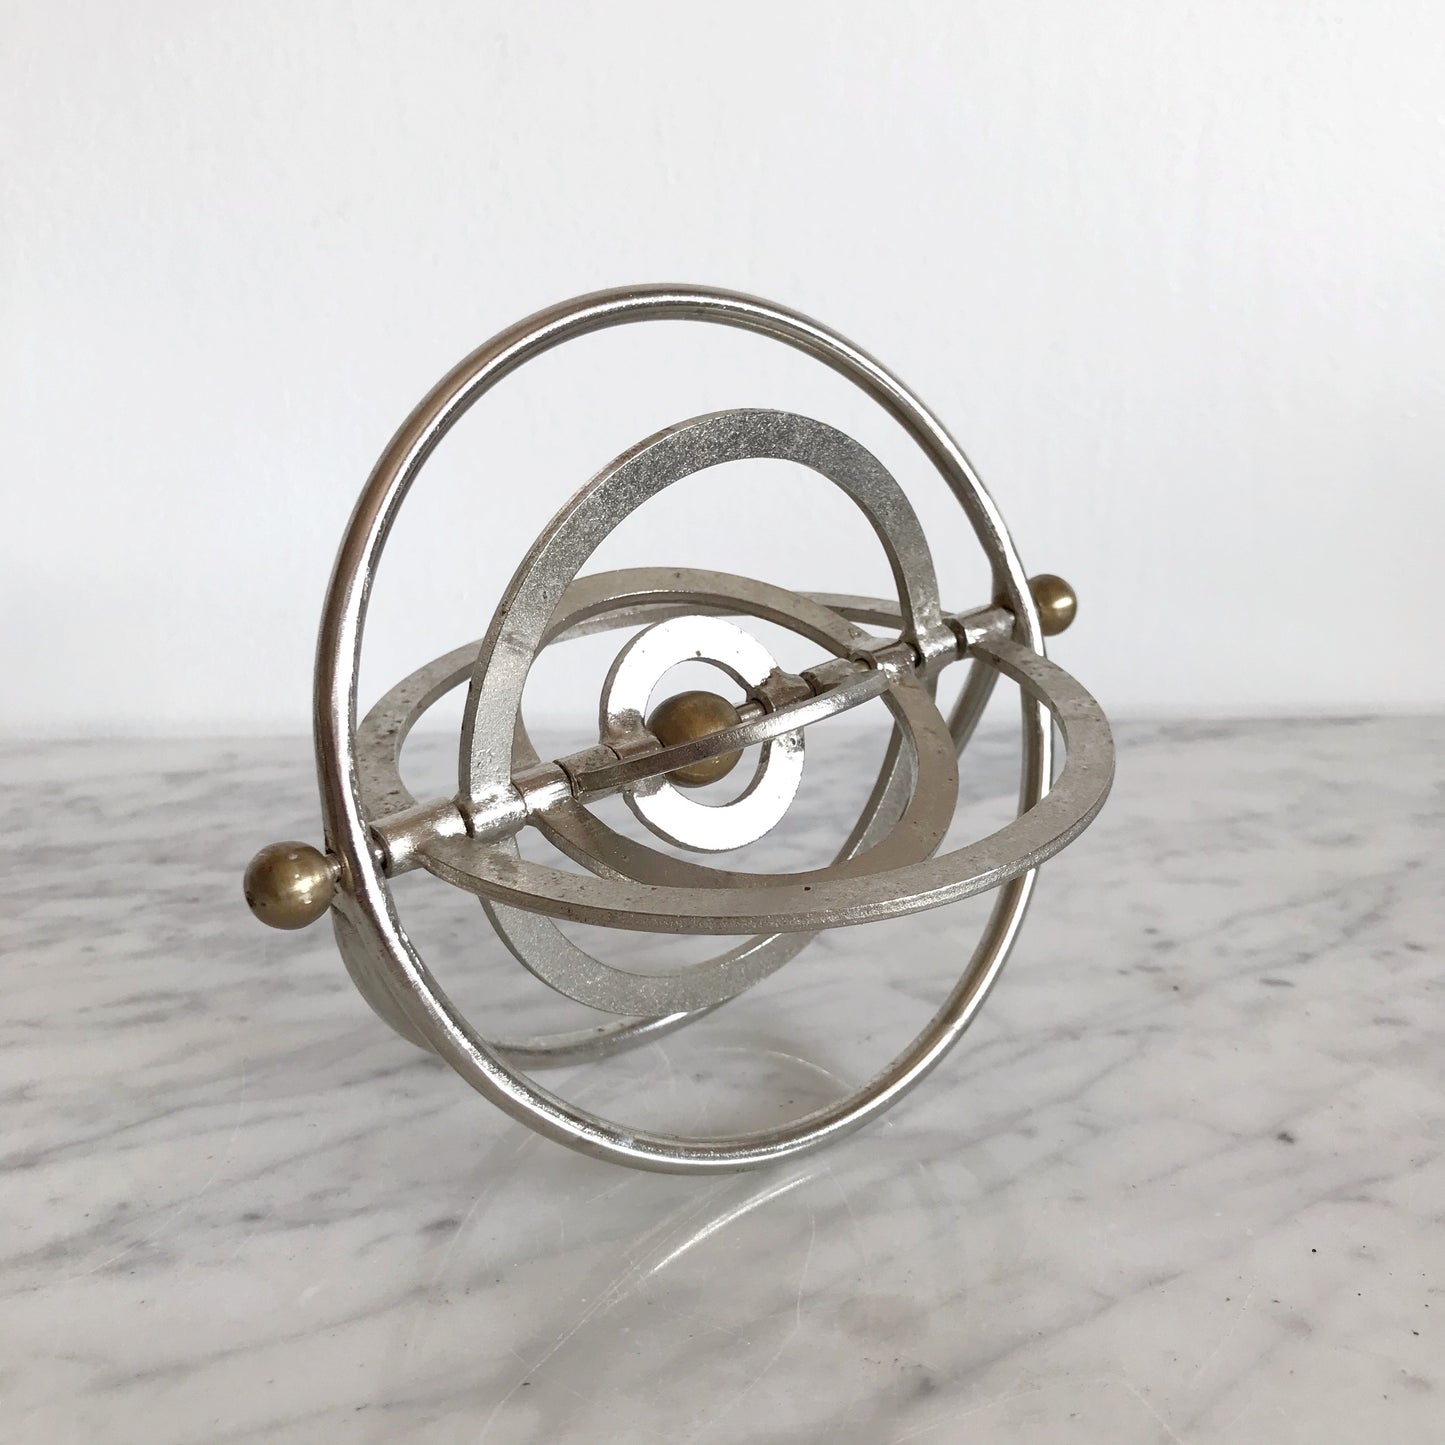 Vintage Spinning Metal Galaxy Orb Object